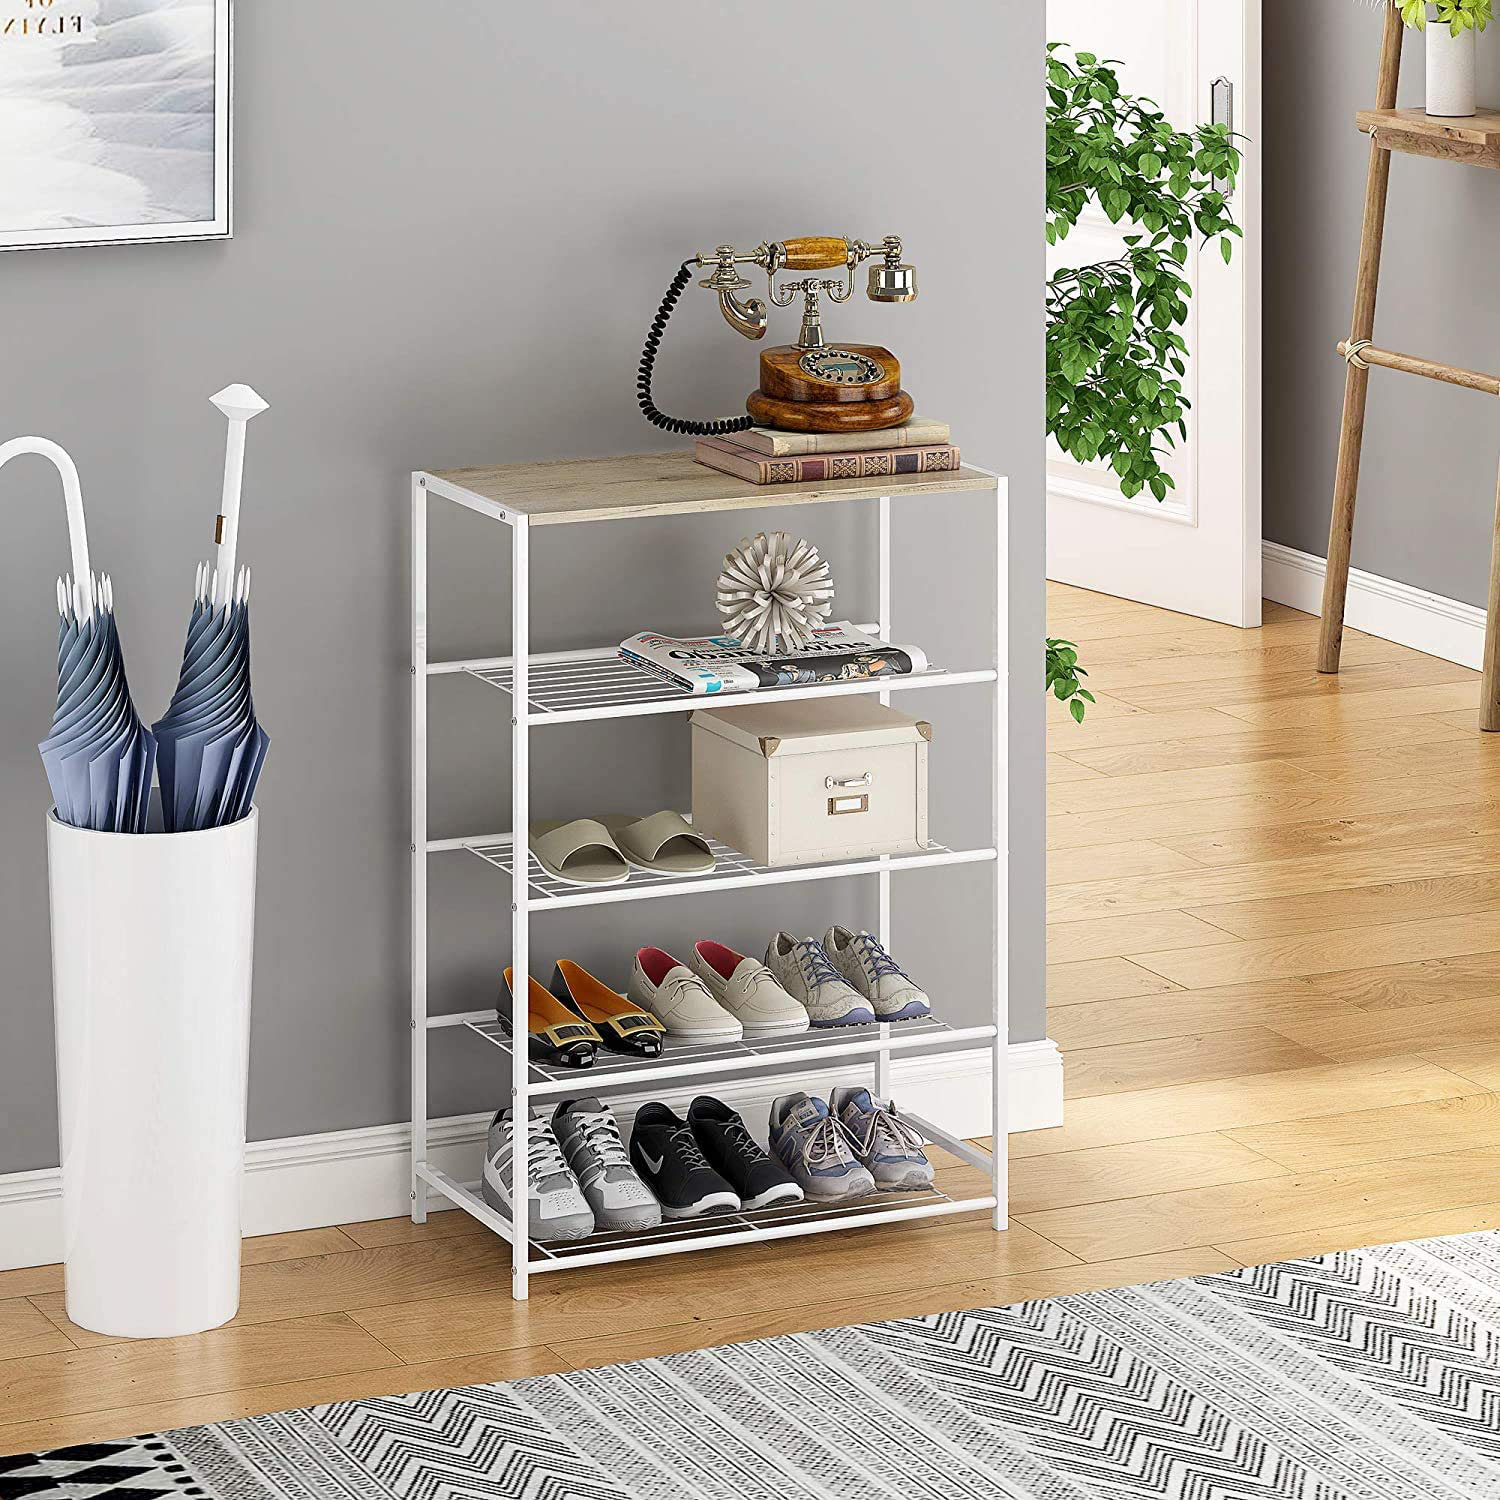 Practical Shoes Shelf,with 5-Tier and 8 Hooks,Storage for Living Room,Bedroom,Hallway UDEAR Entryway Coat Rack